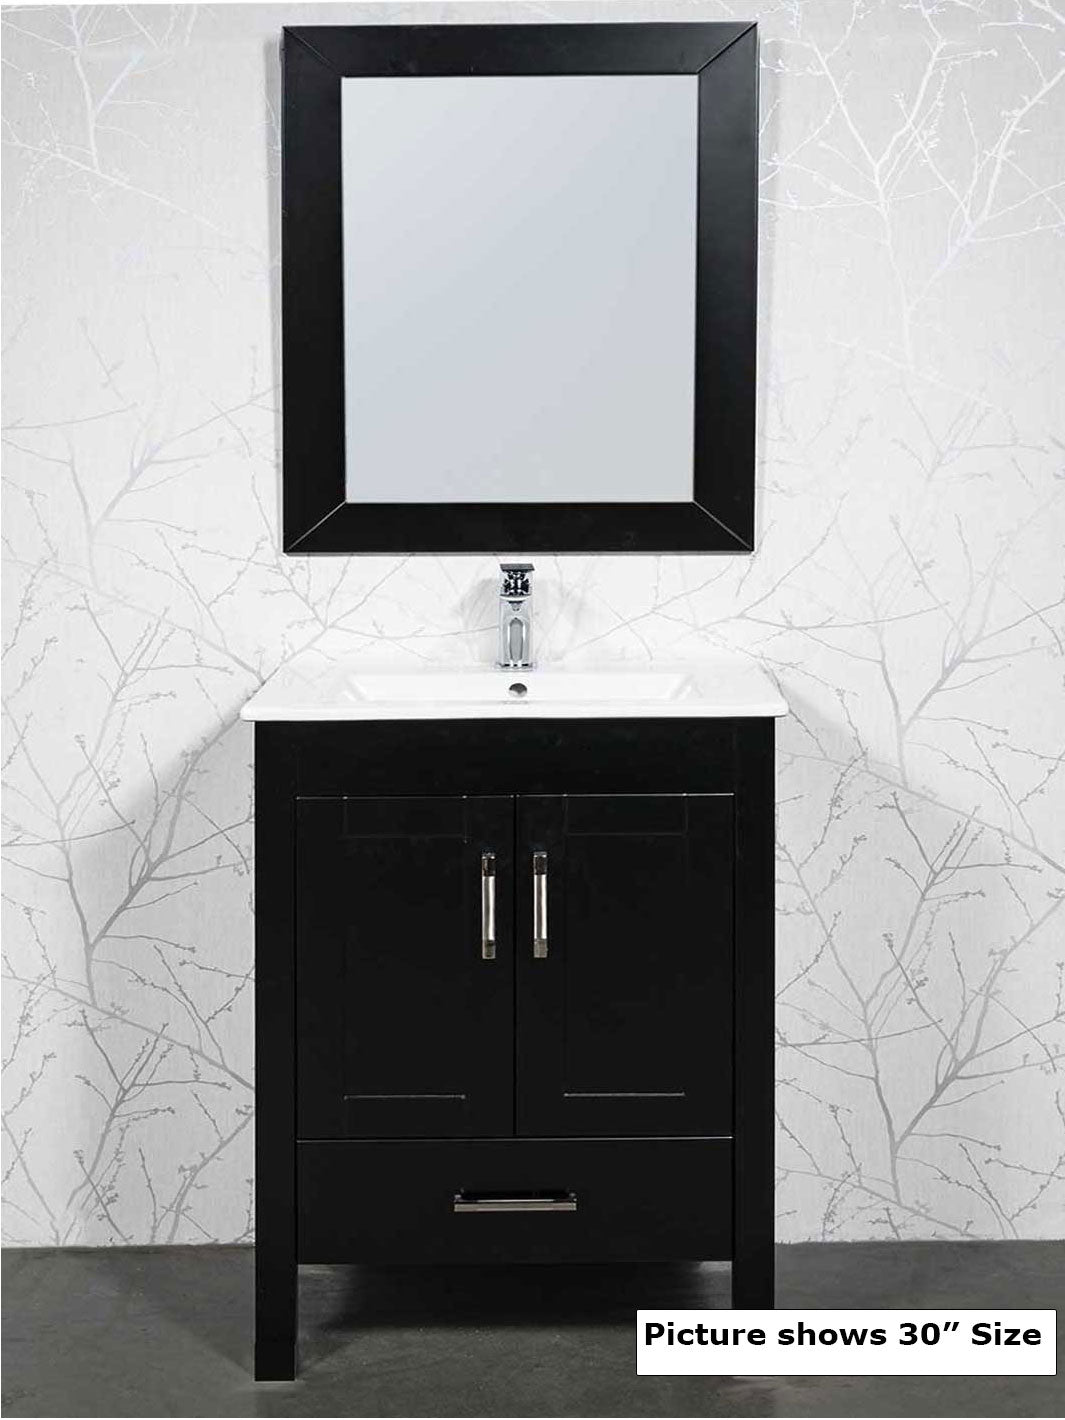 black bathroom cabinet with matching mirror. white ceramic sink. chrome faucet